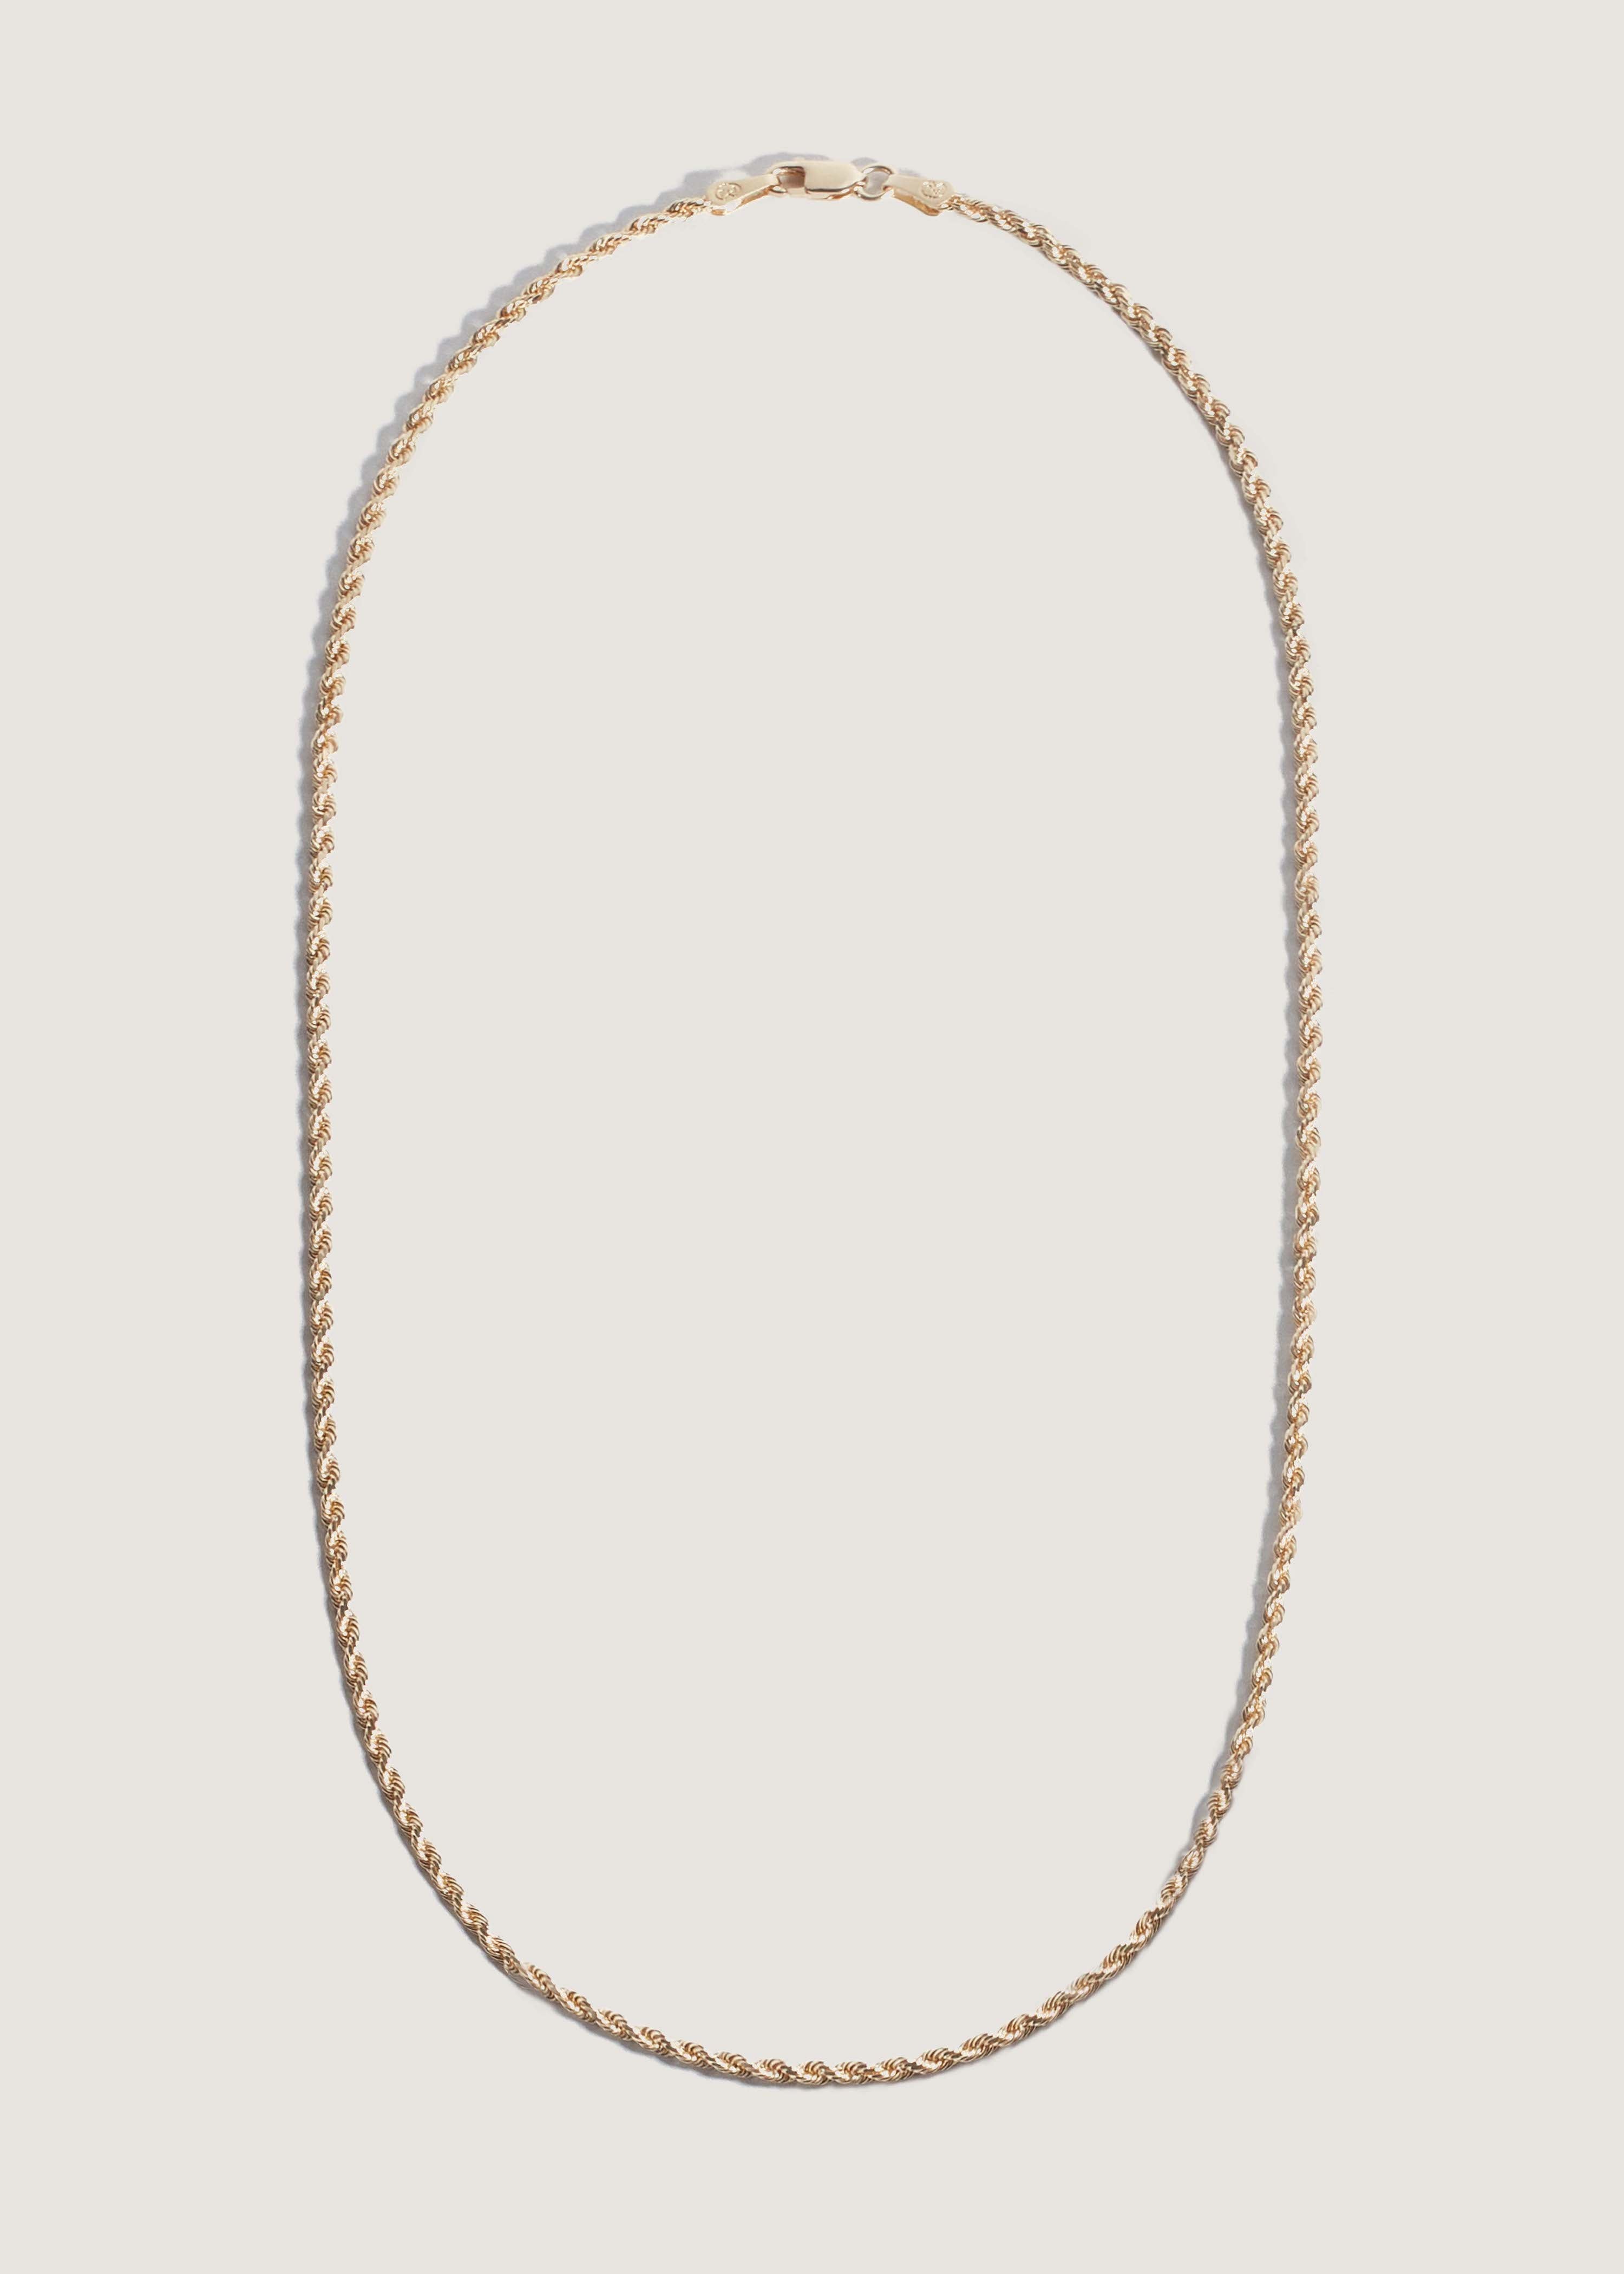 Rope Chain Necklace 14K Gold - Kinn 20